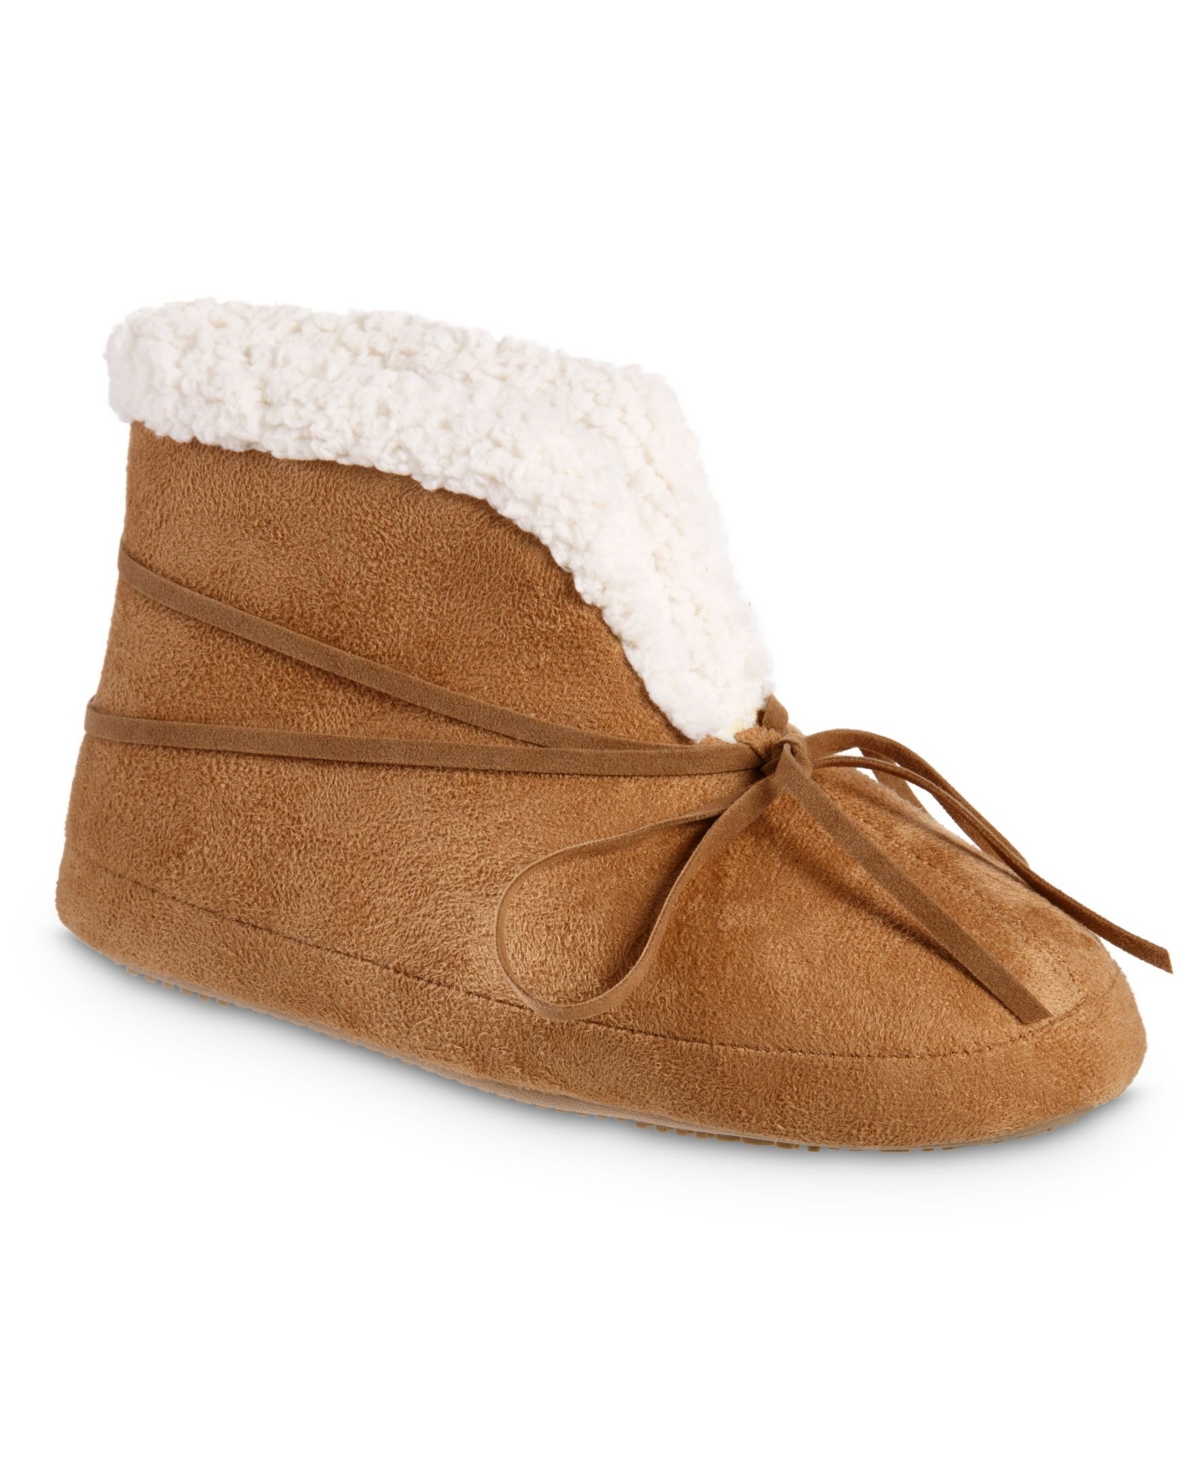 Isotoner Signature Women's Recycled Rory Bootie Slippers